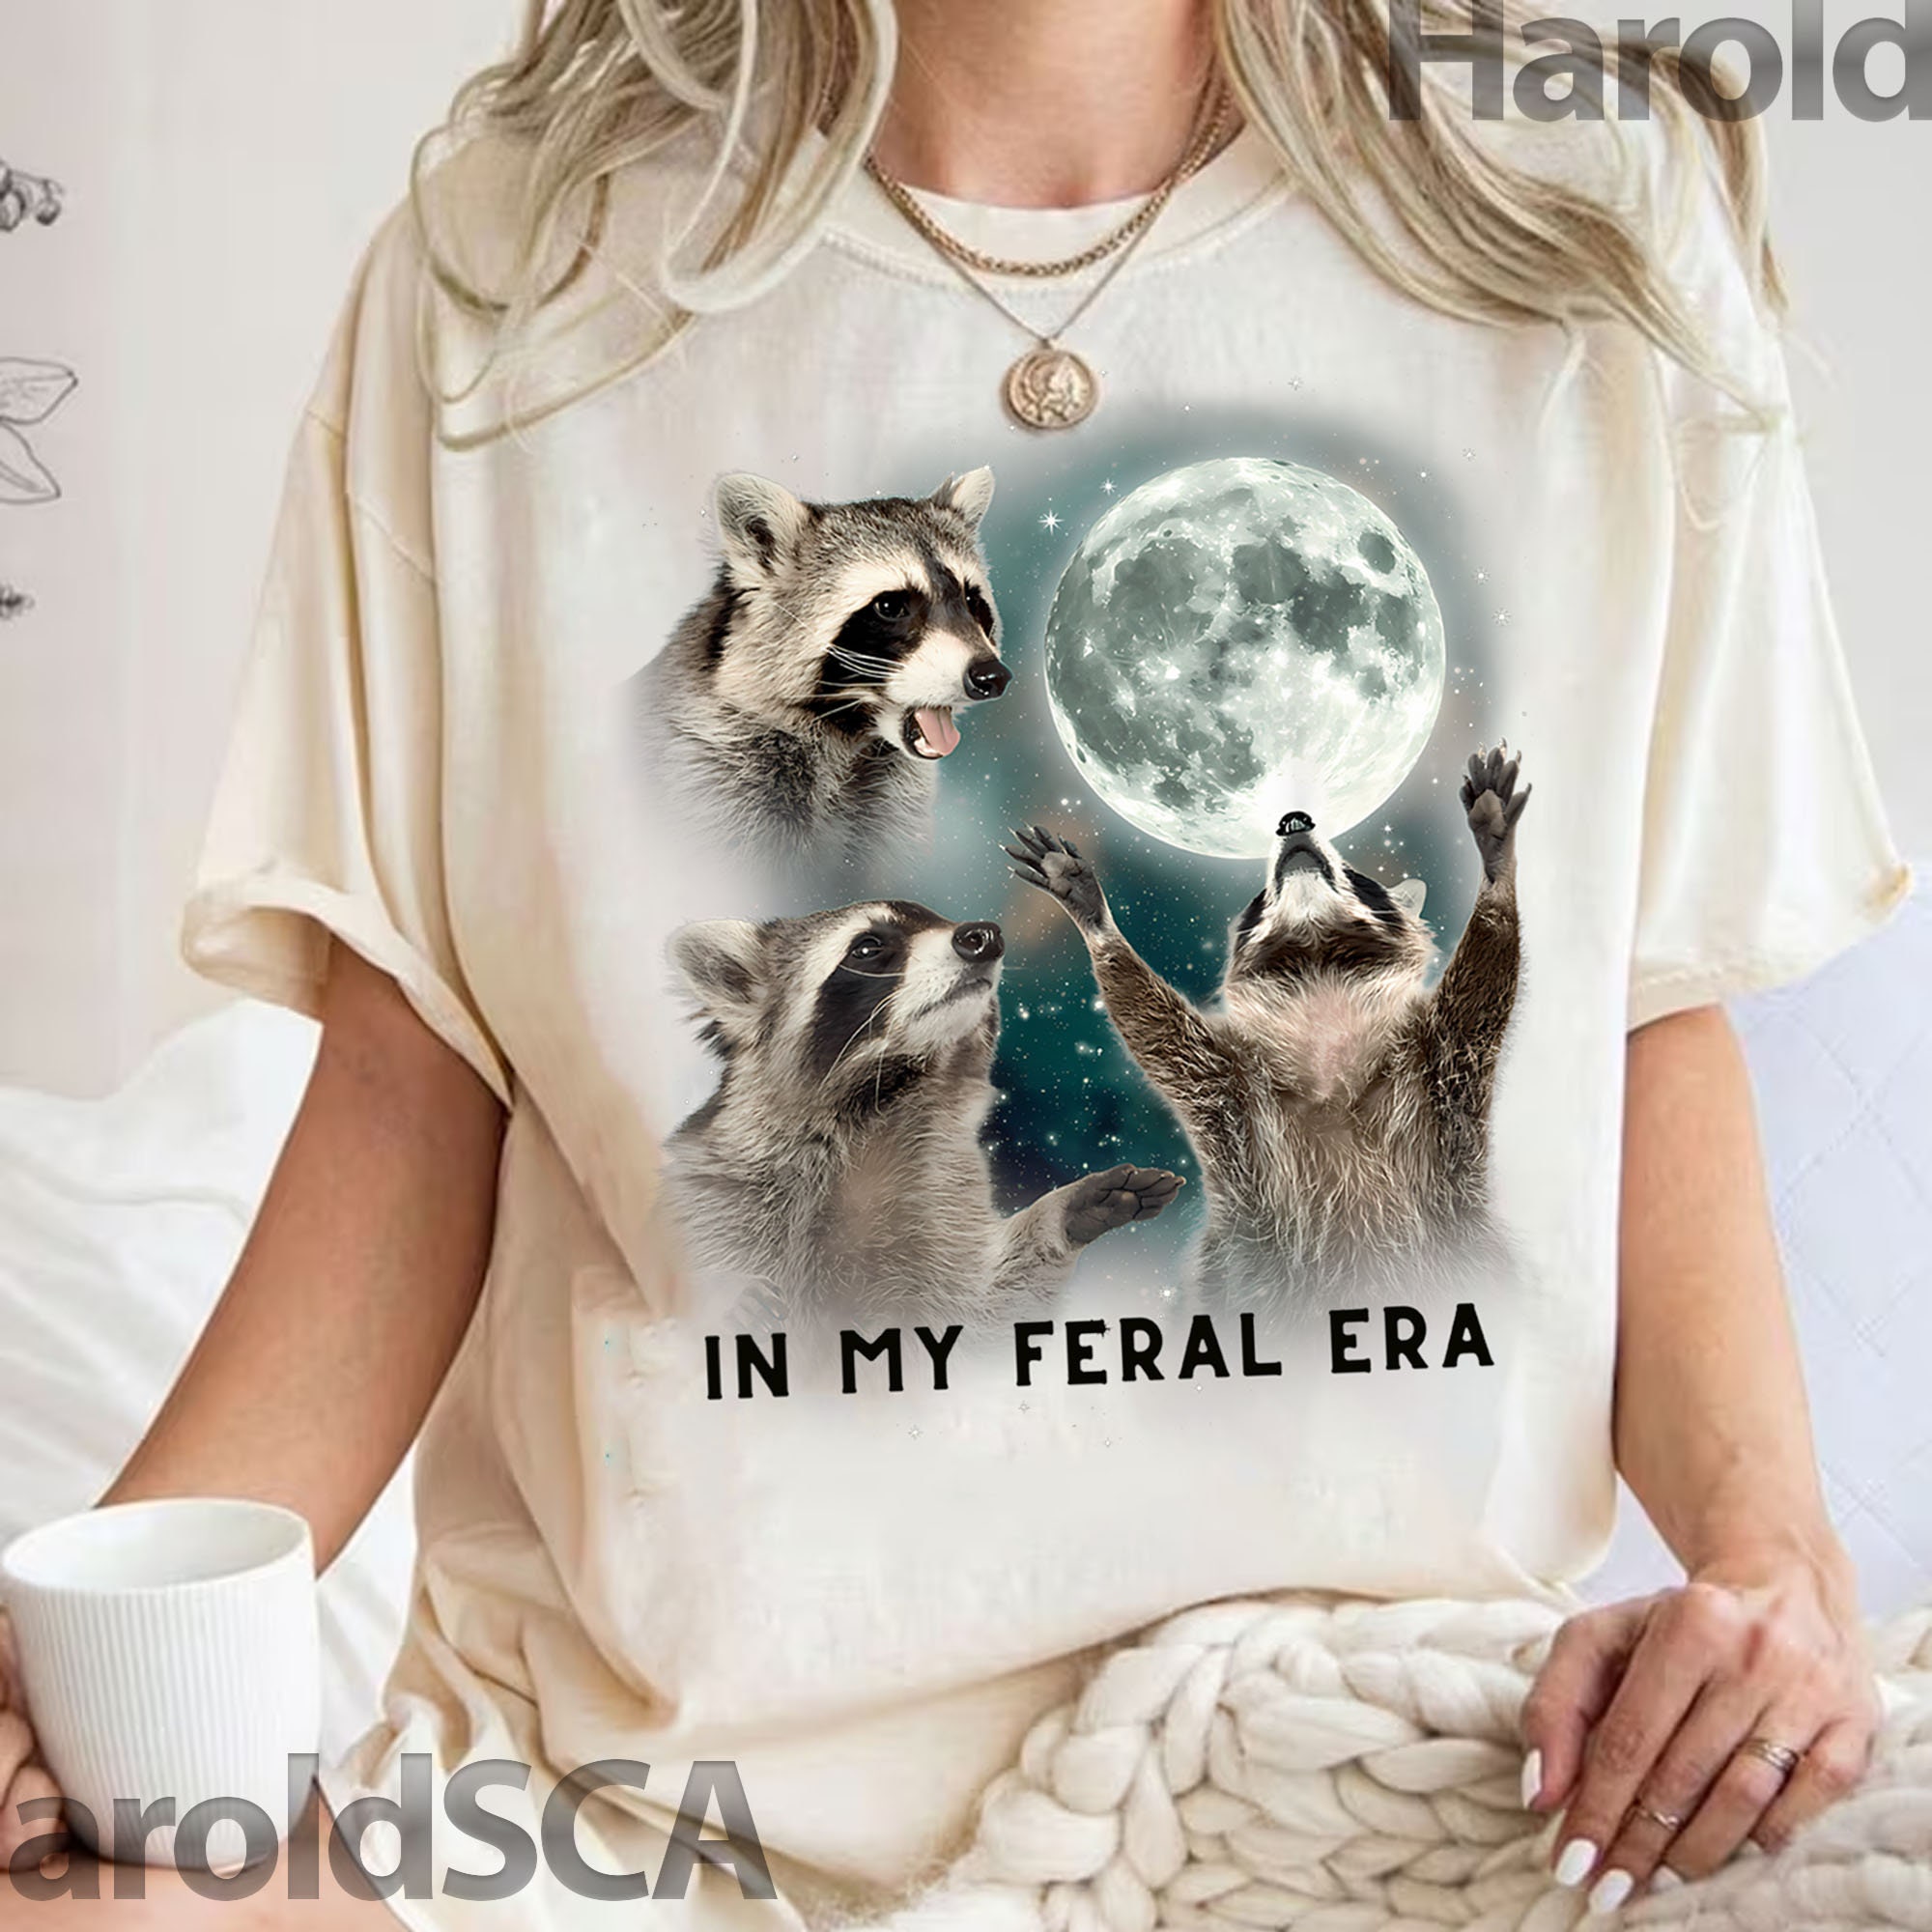 In My Feral Era Racoons Howling at the Moon T-shirt and Sweatshirt - Etsy